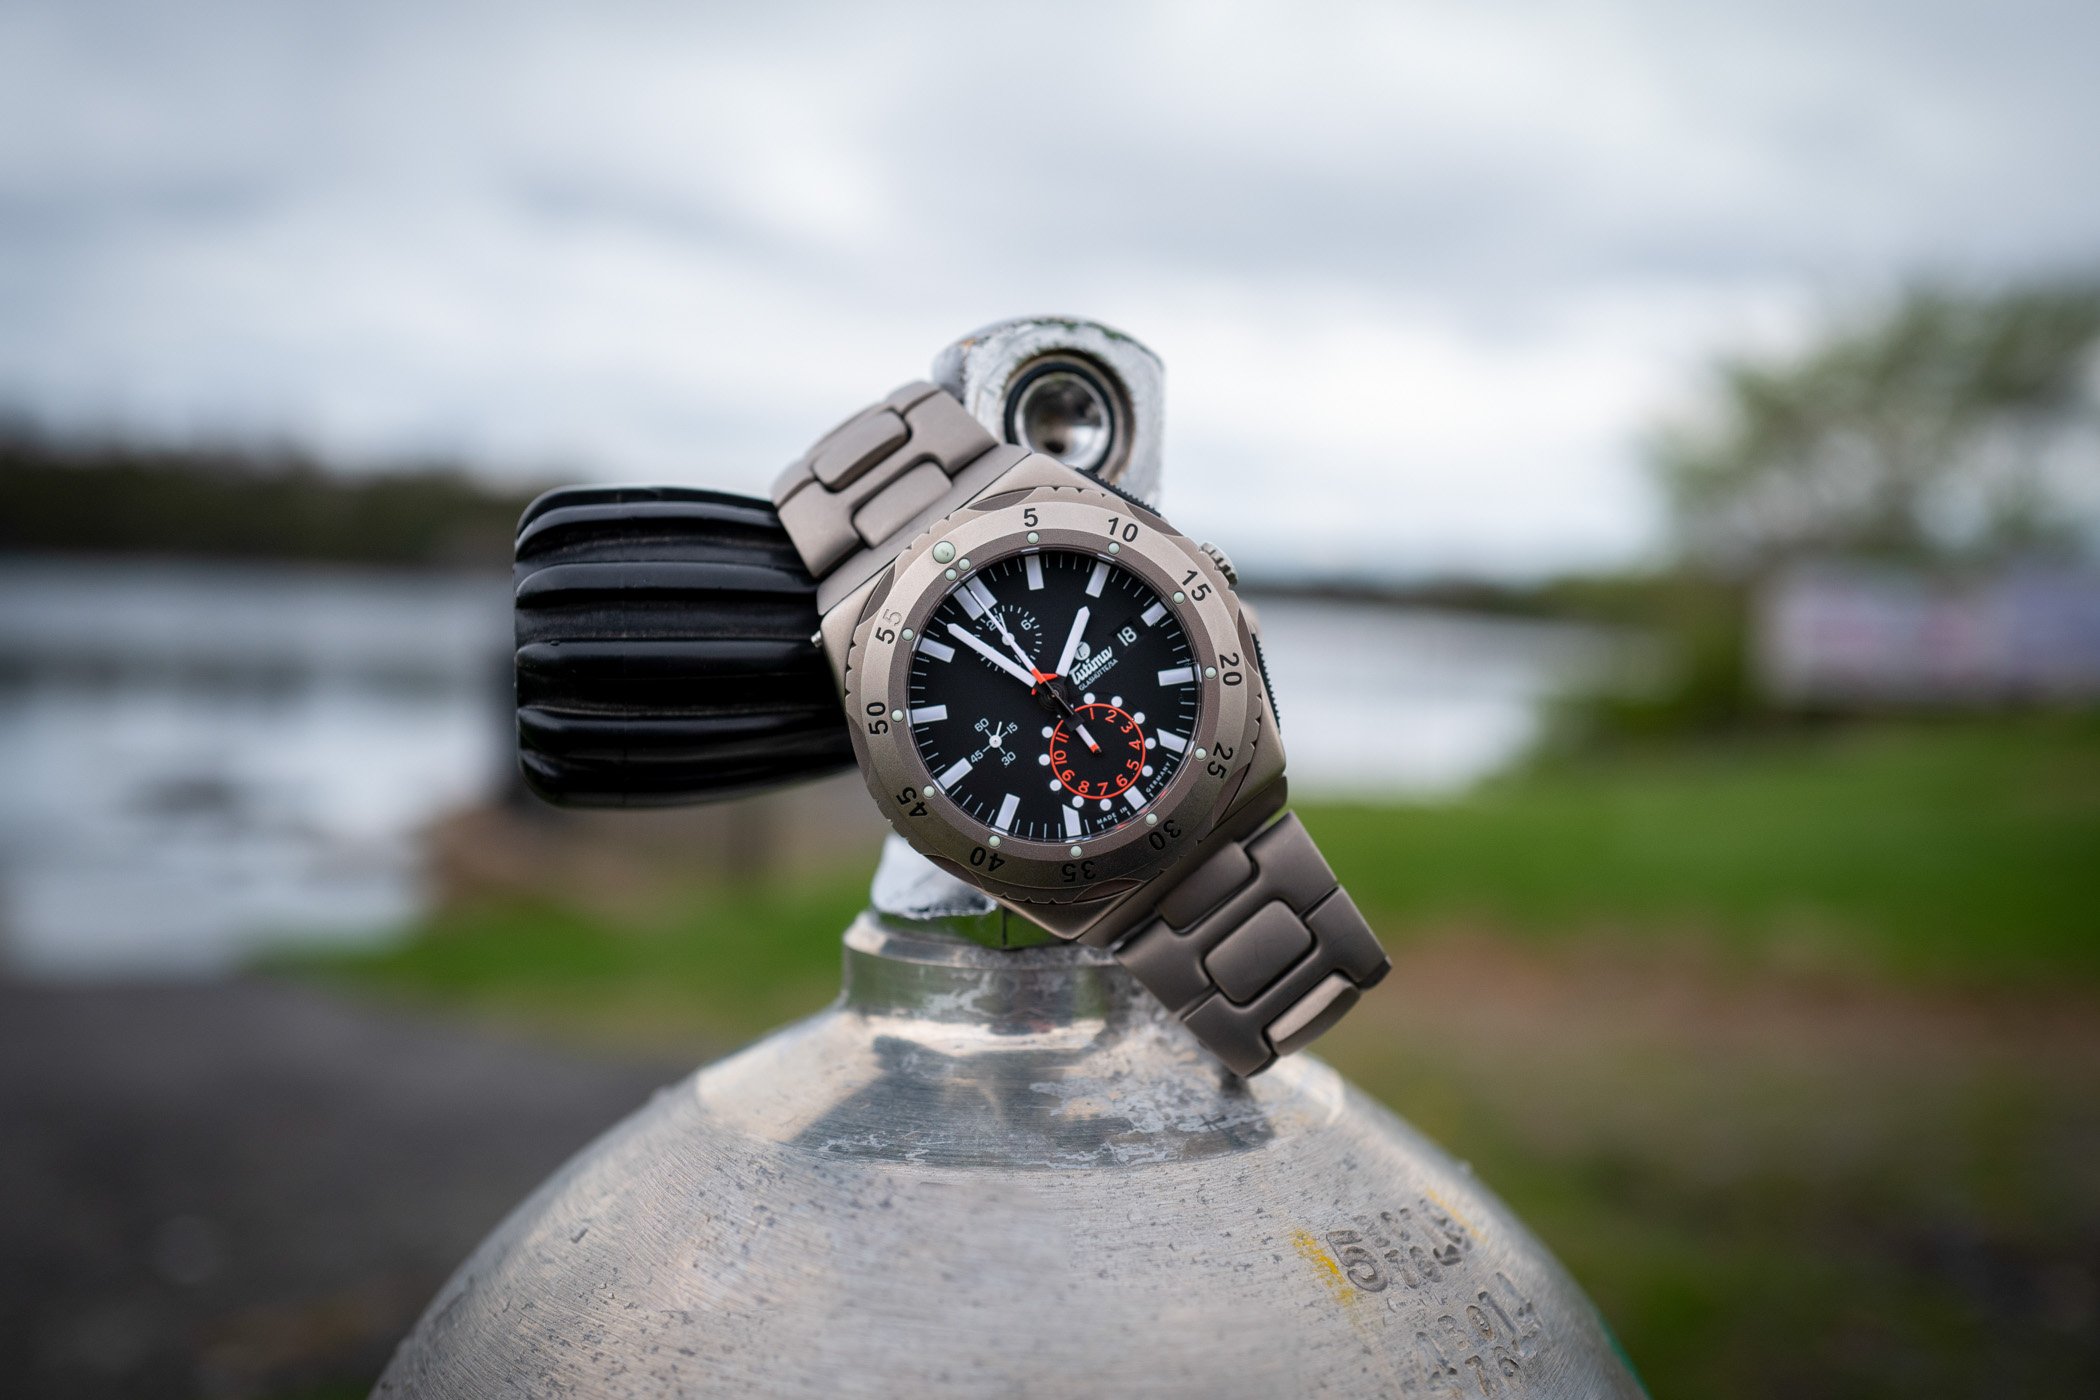 In-Depth Review - Diving With The Tutima M2 Pioneer Chronograph 6451